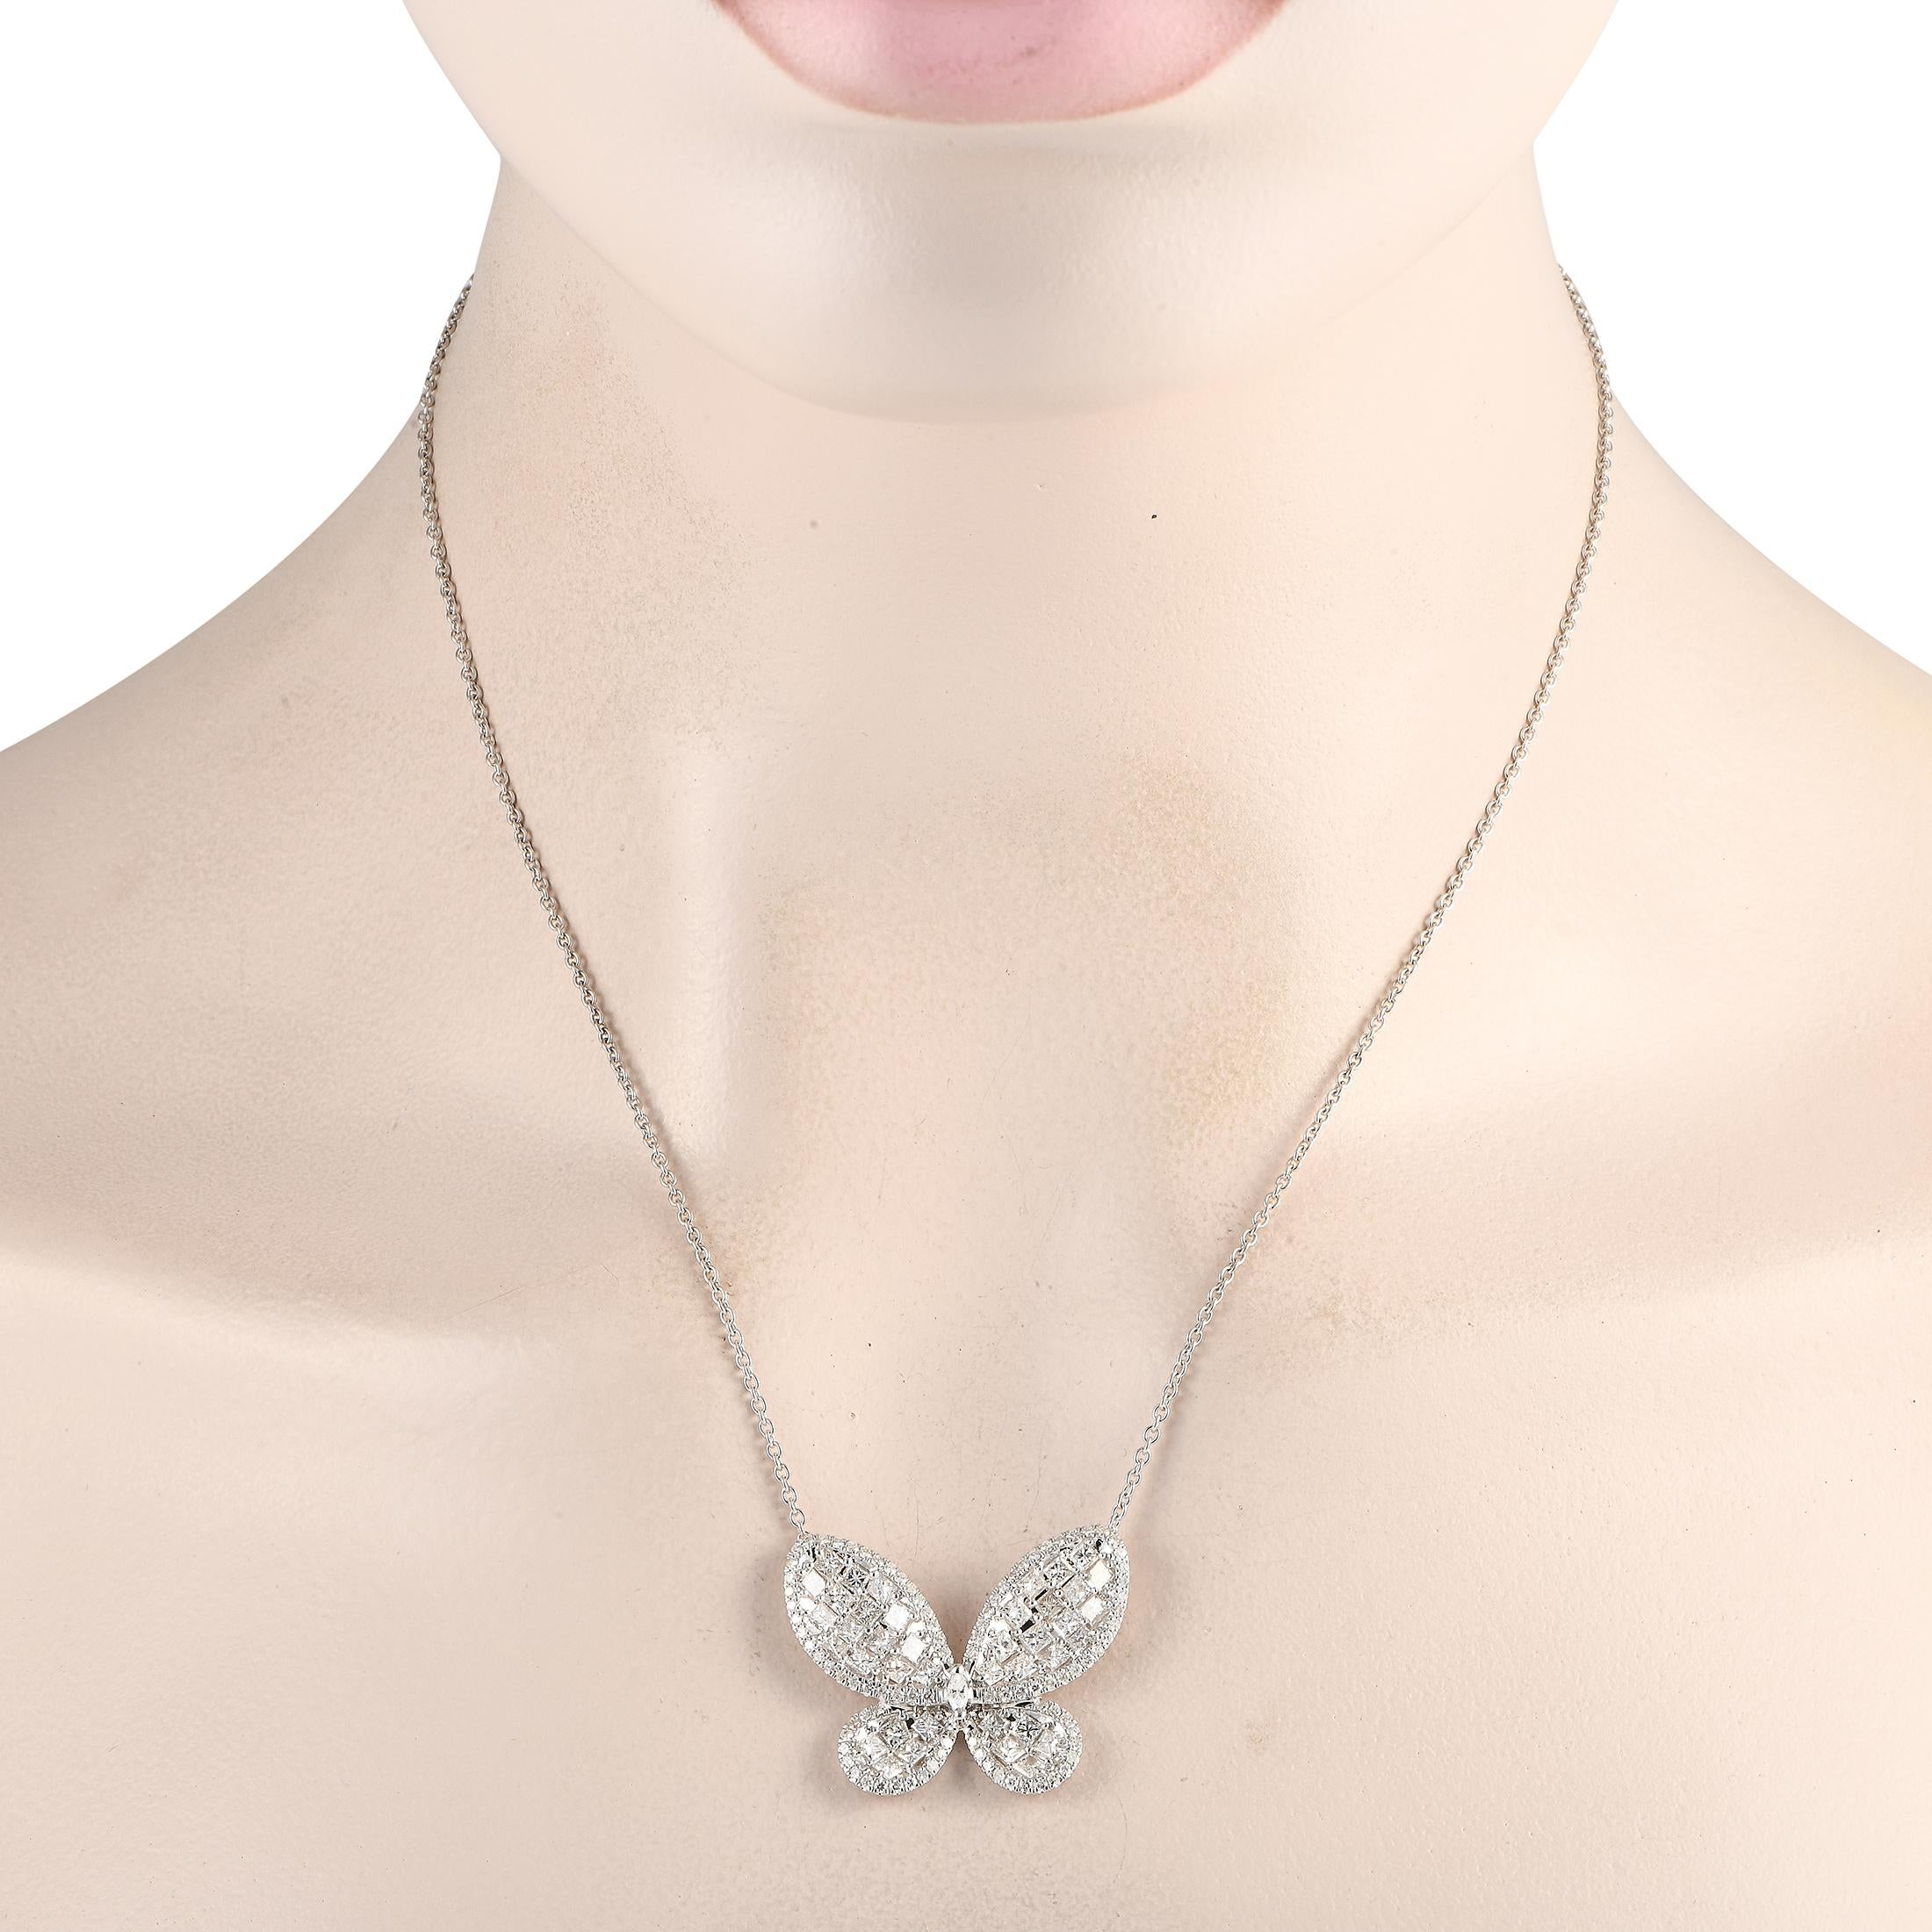 A butterfly pendant measuring 1.0 long by 1.25 wide sits at the center of a 17 chain on this breathtaking necklace. This incredibly charming accessory is crafted from 14K White Gold and comes complete with sparkling diamonds totaling 3.73